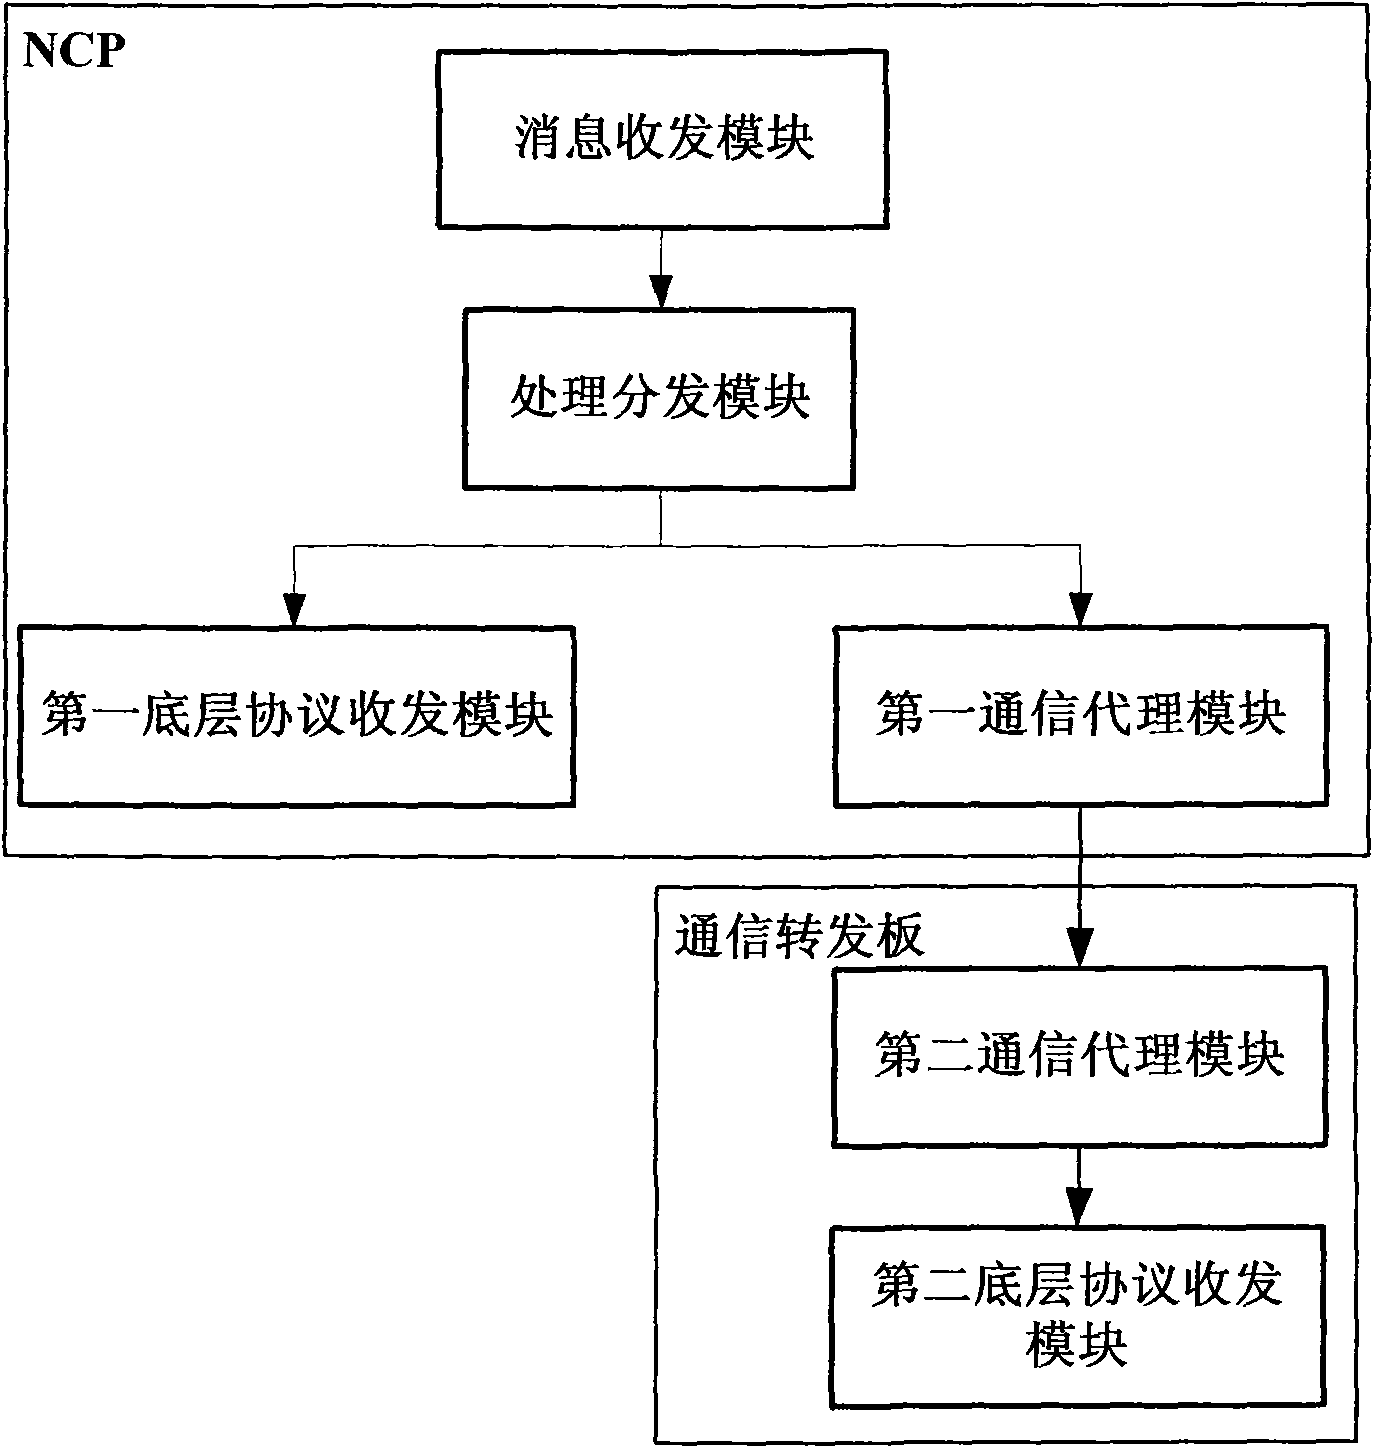 Extensible network element management system and method